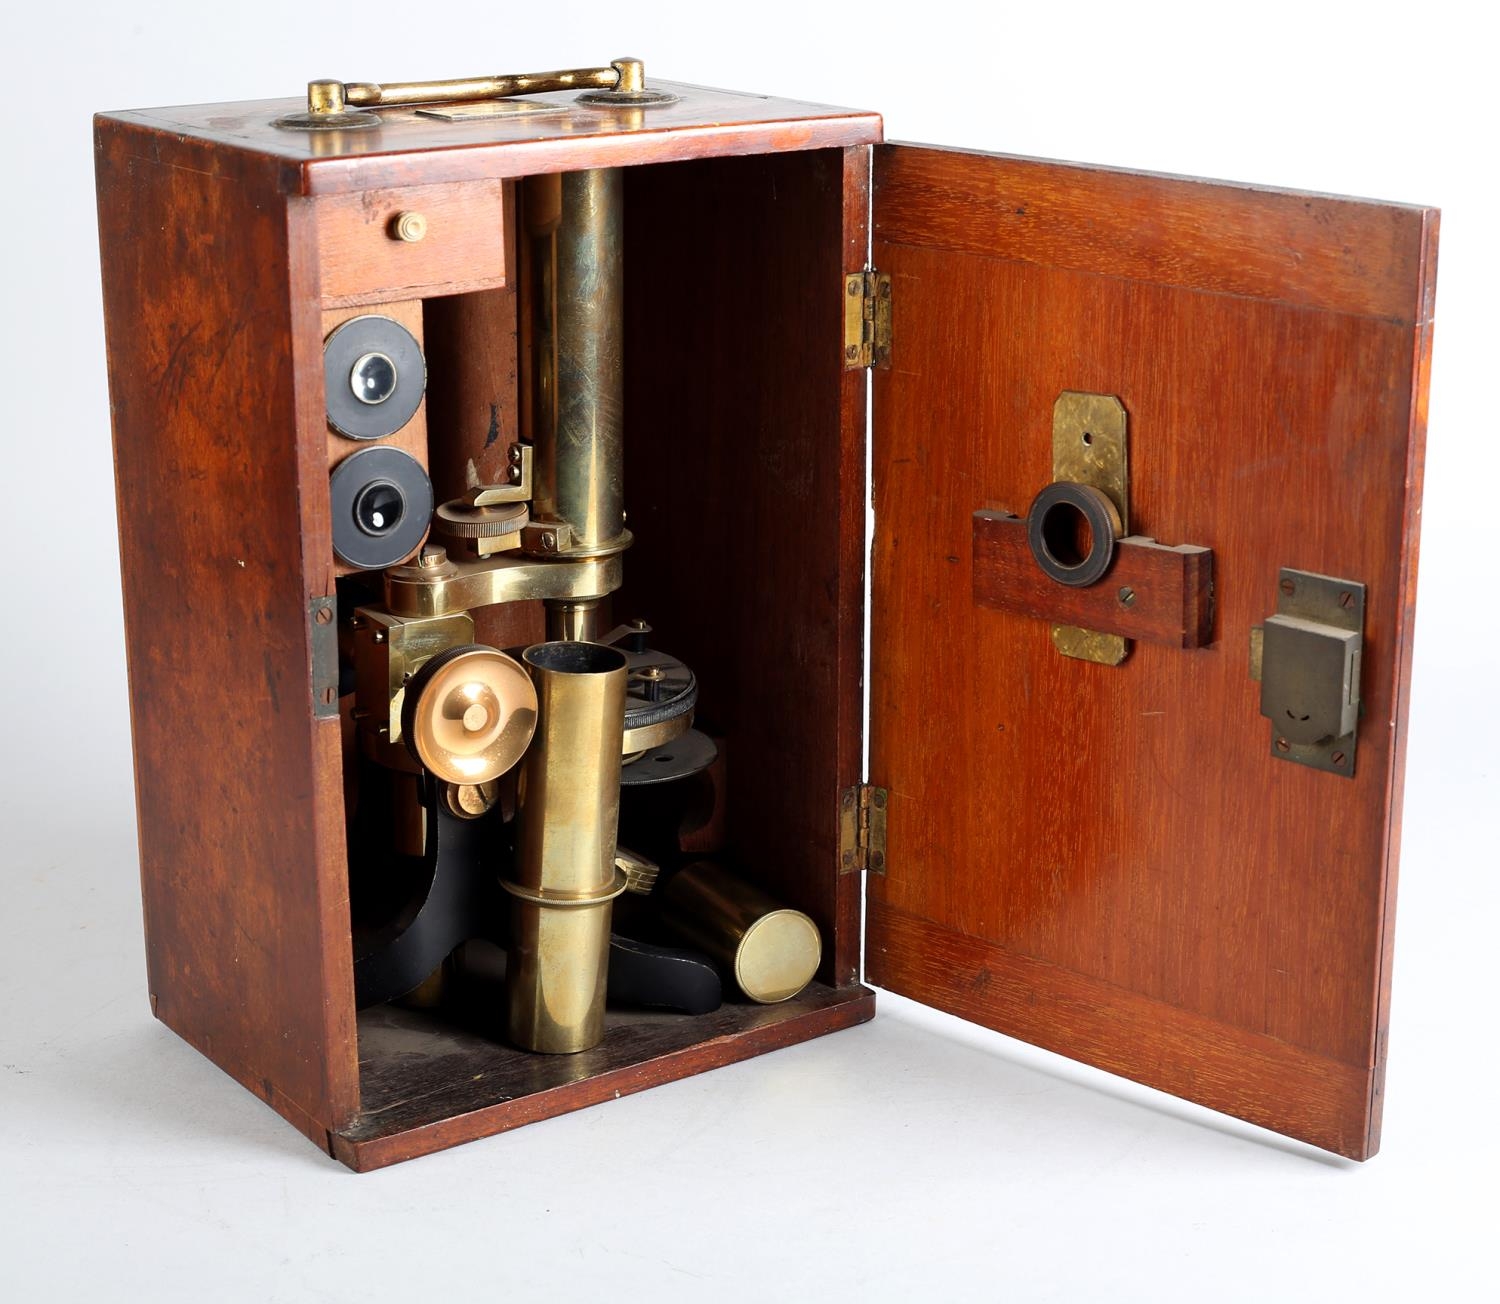 A VICTORIAN BRASS MICROSCOPE BY H HUGHES & SON, 59 Fenchurch St, London, with additional lenses in a - Image 3 of 7